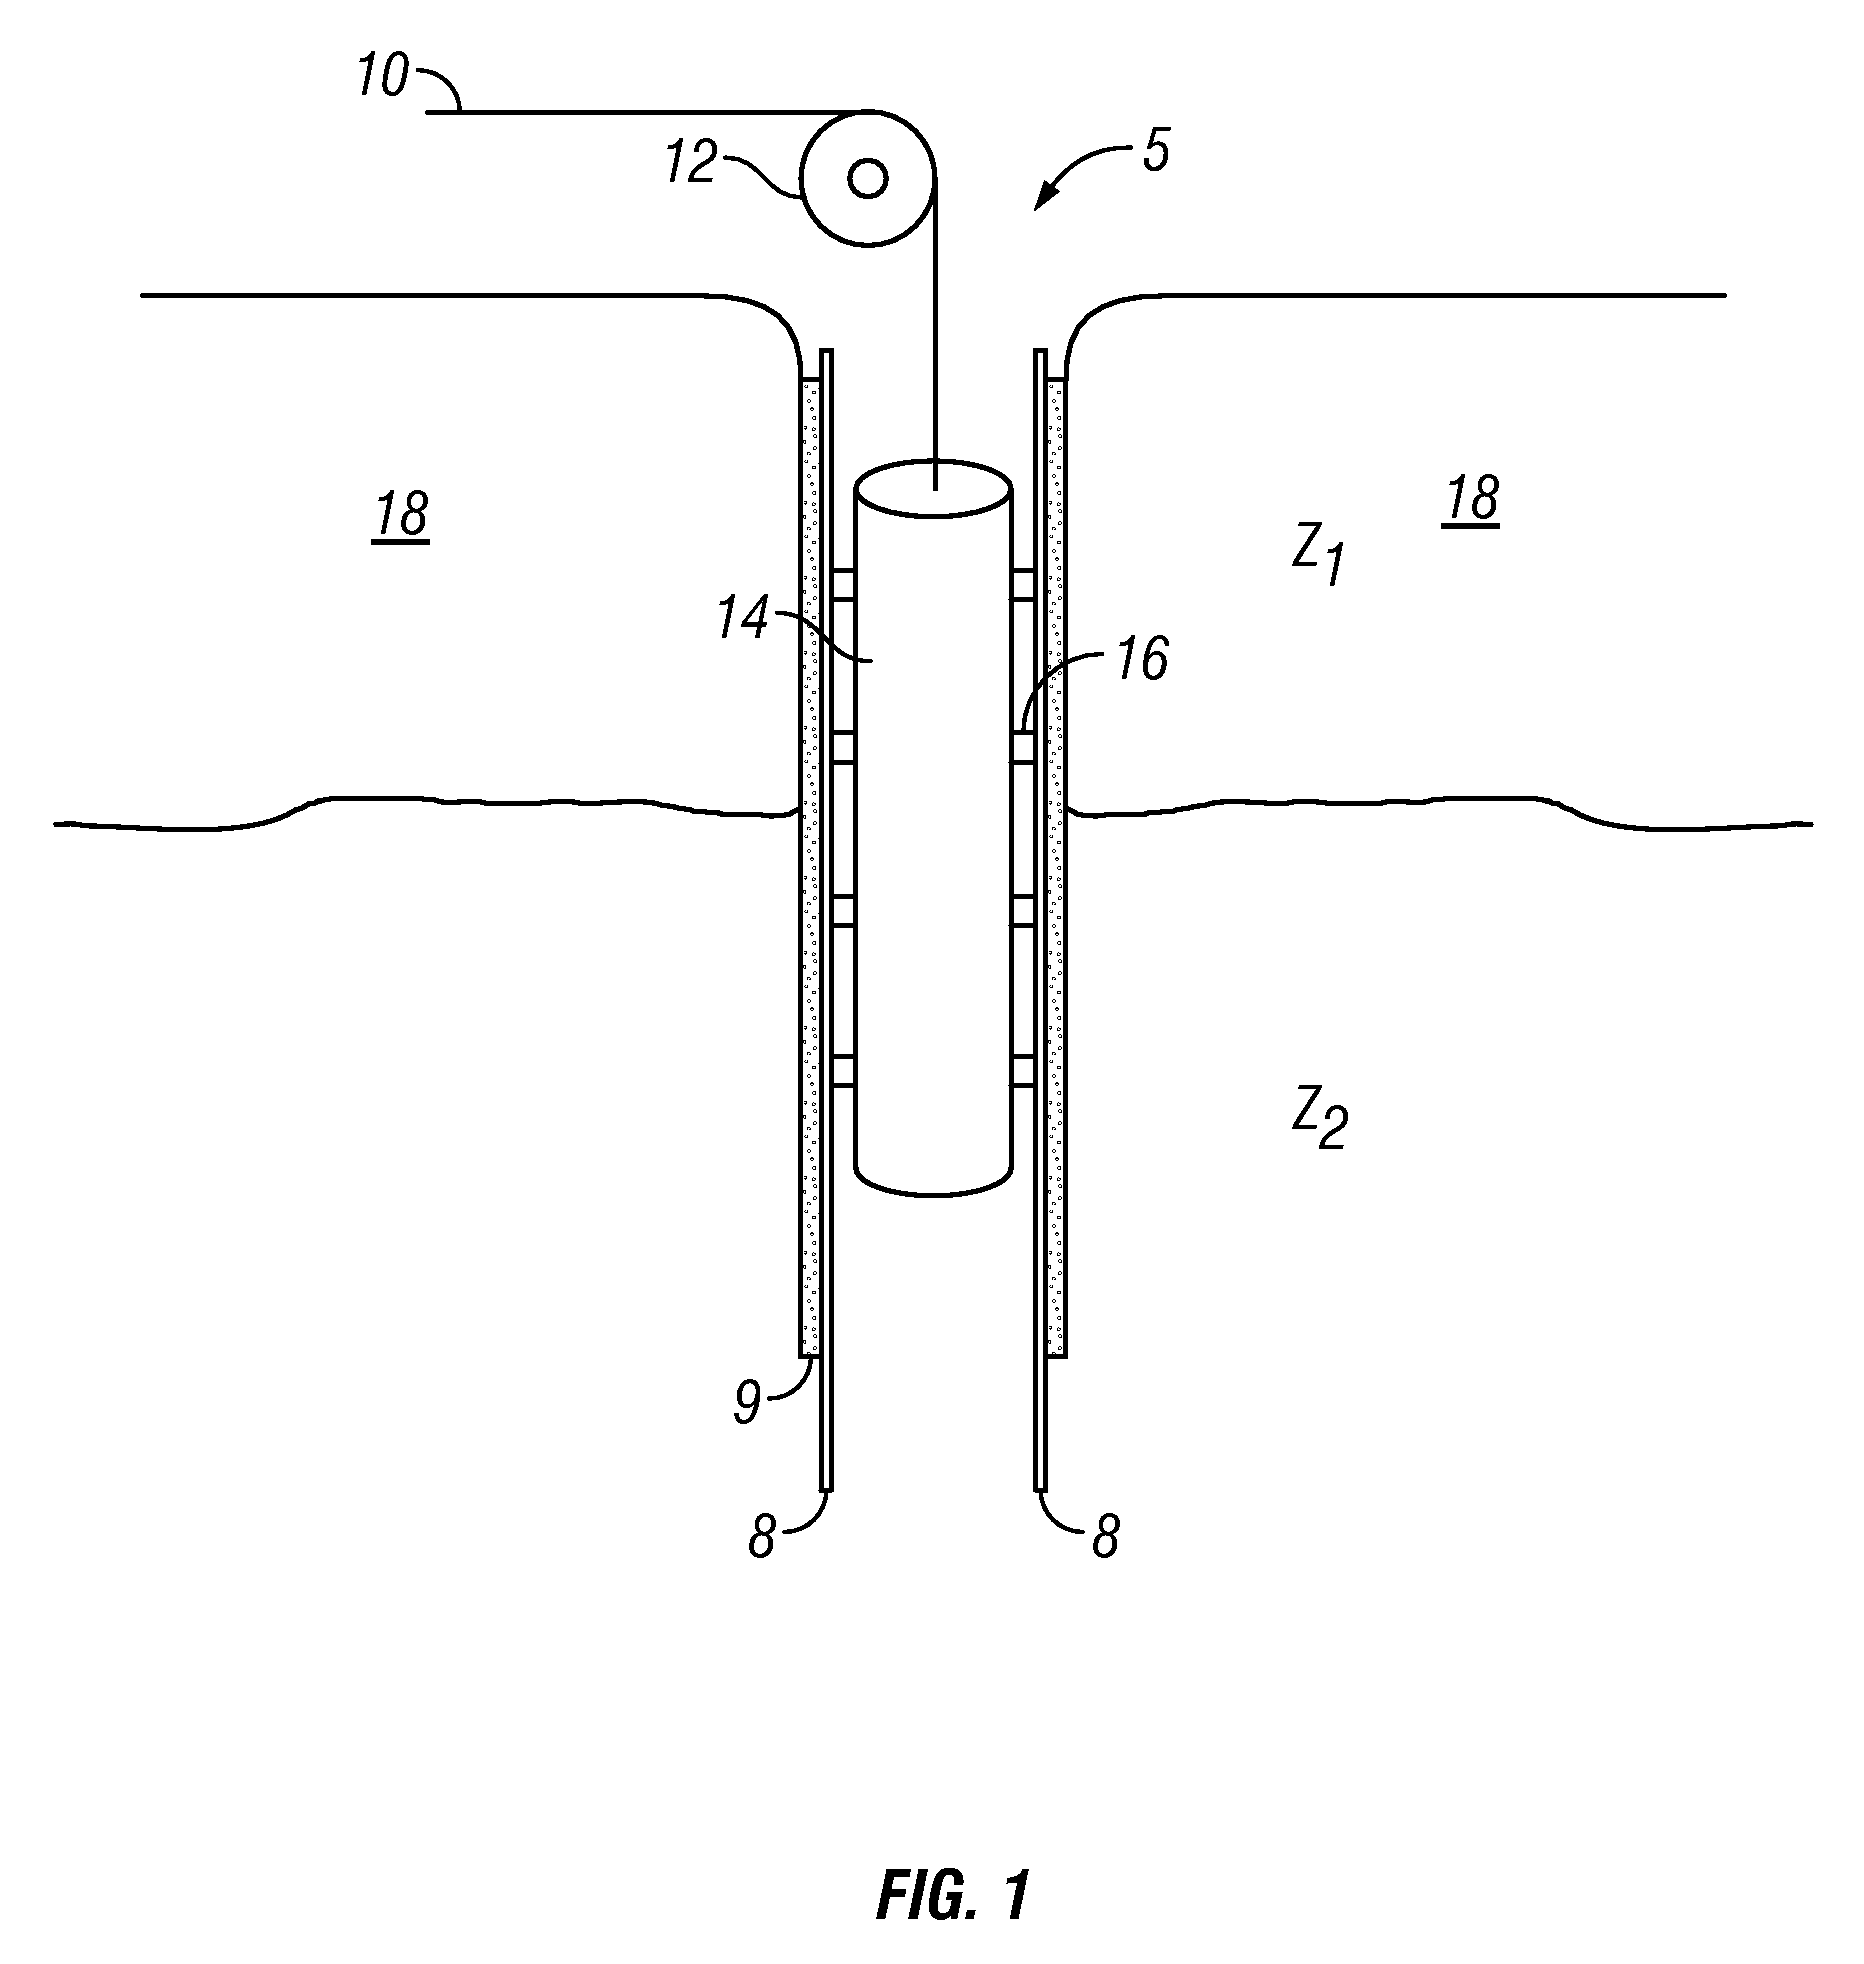 Combined Electro-Magnetic Acoustic Transducer